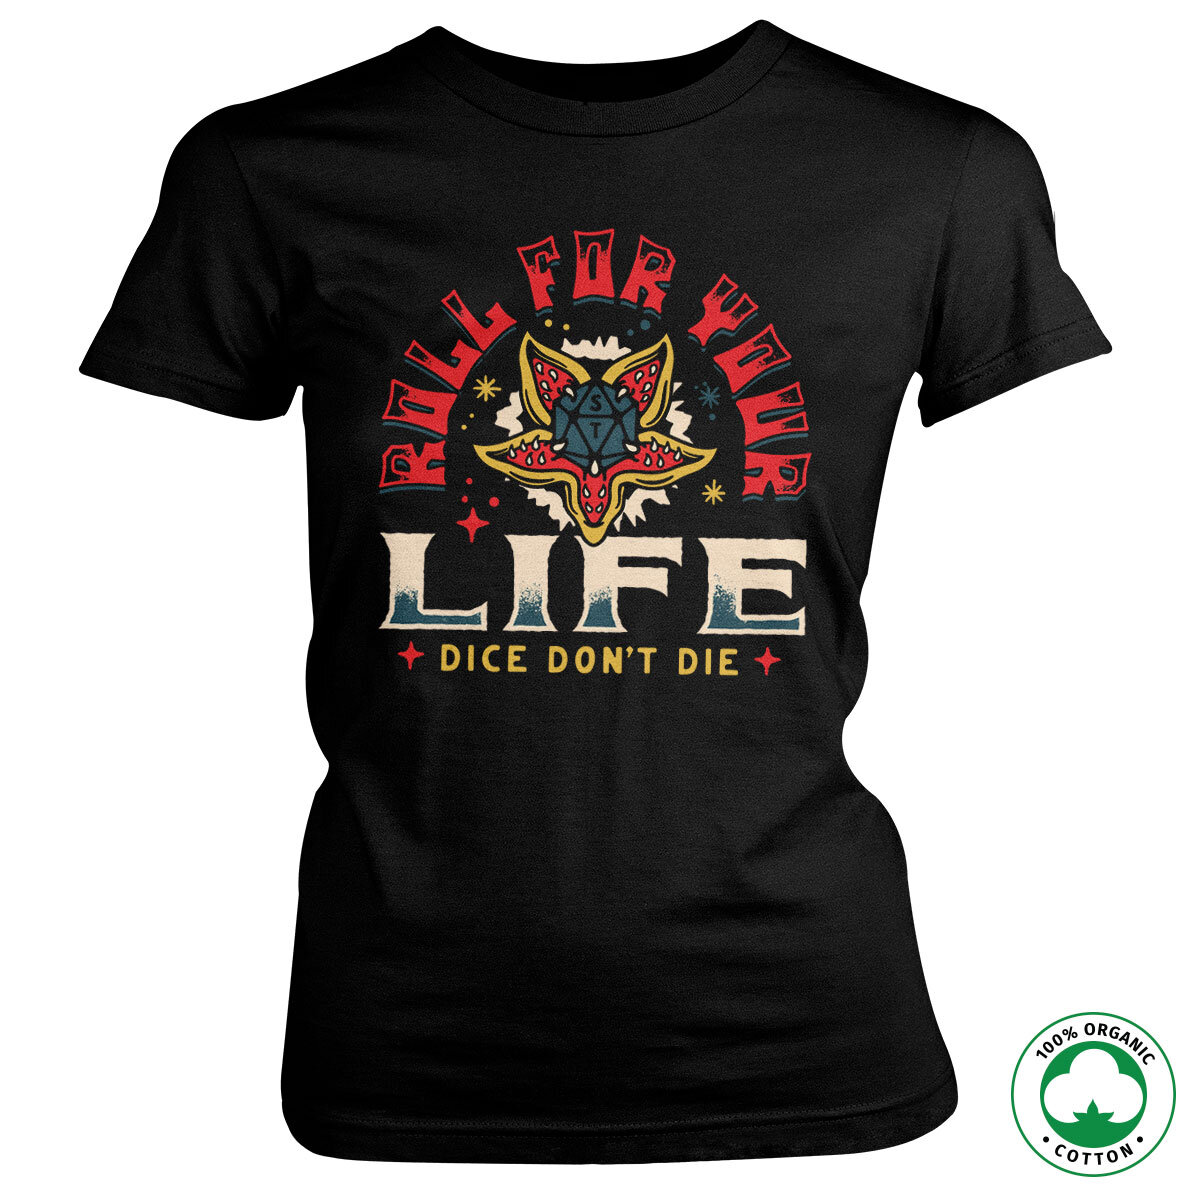 Roll For Your Life Organic Girly Tee